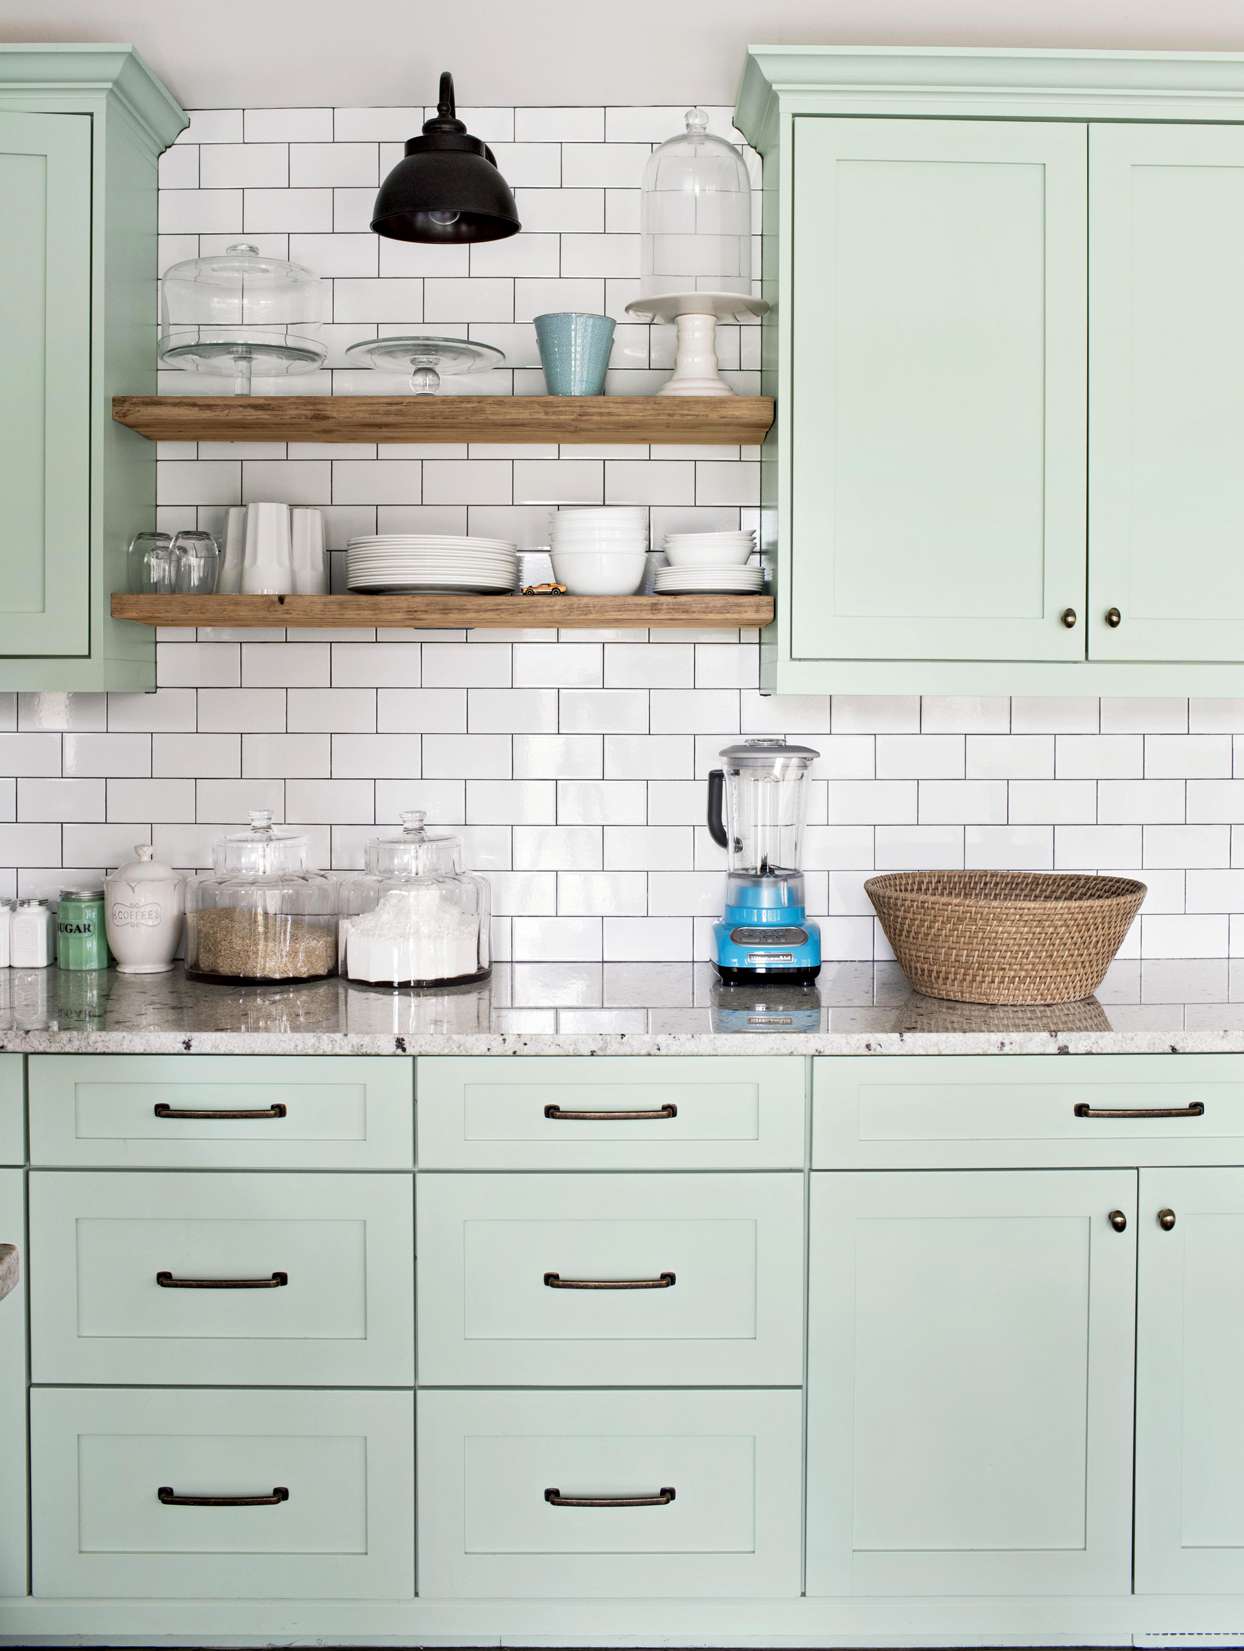 19 Popular Kitchen Cabinet Colors With, What Color Should I Paint Old Kitchen Cabinets